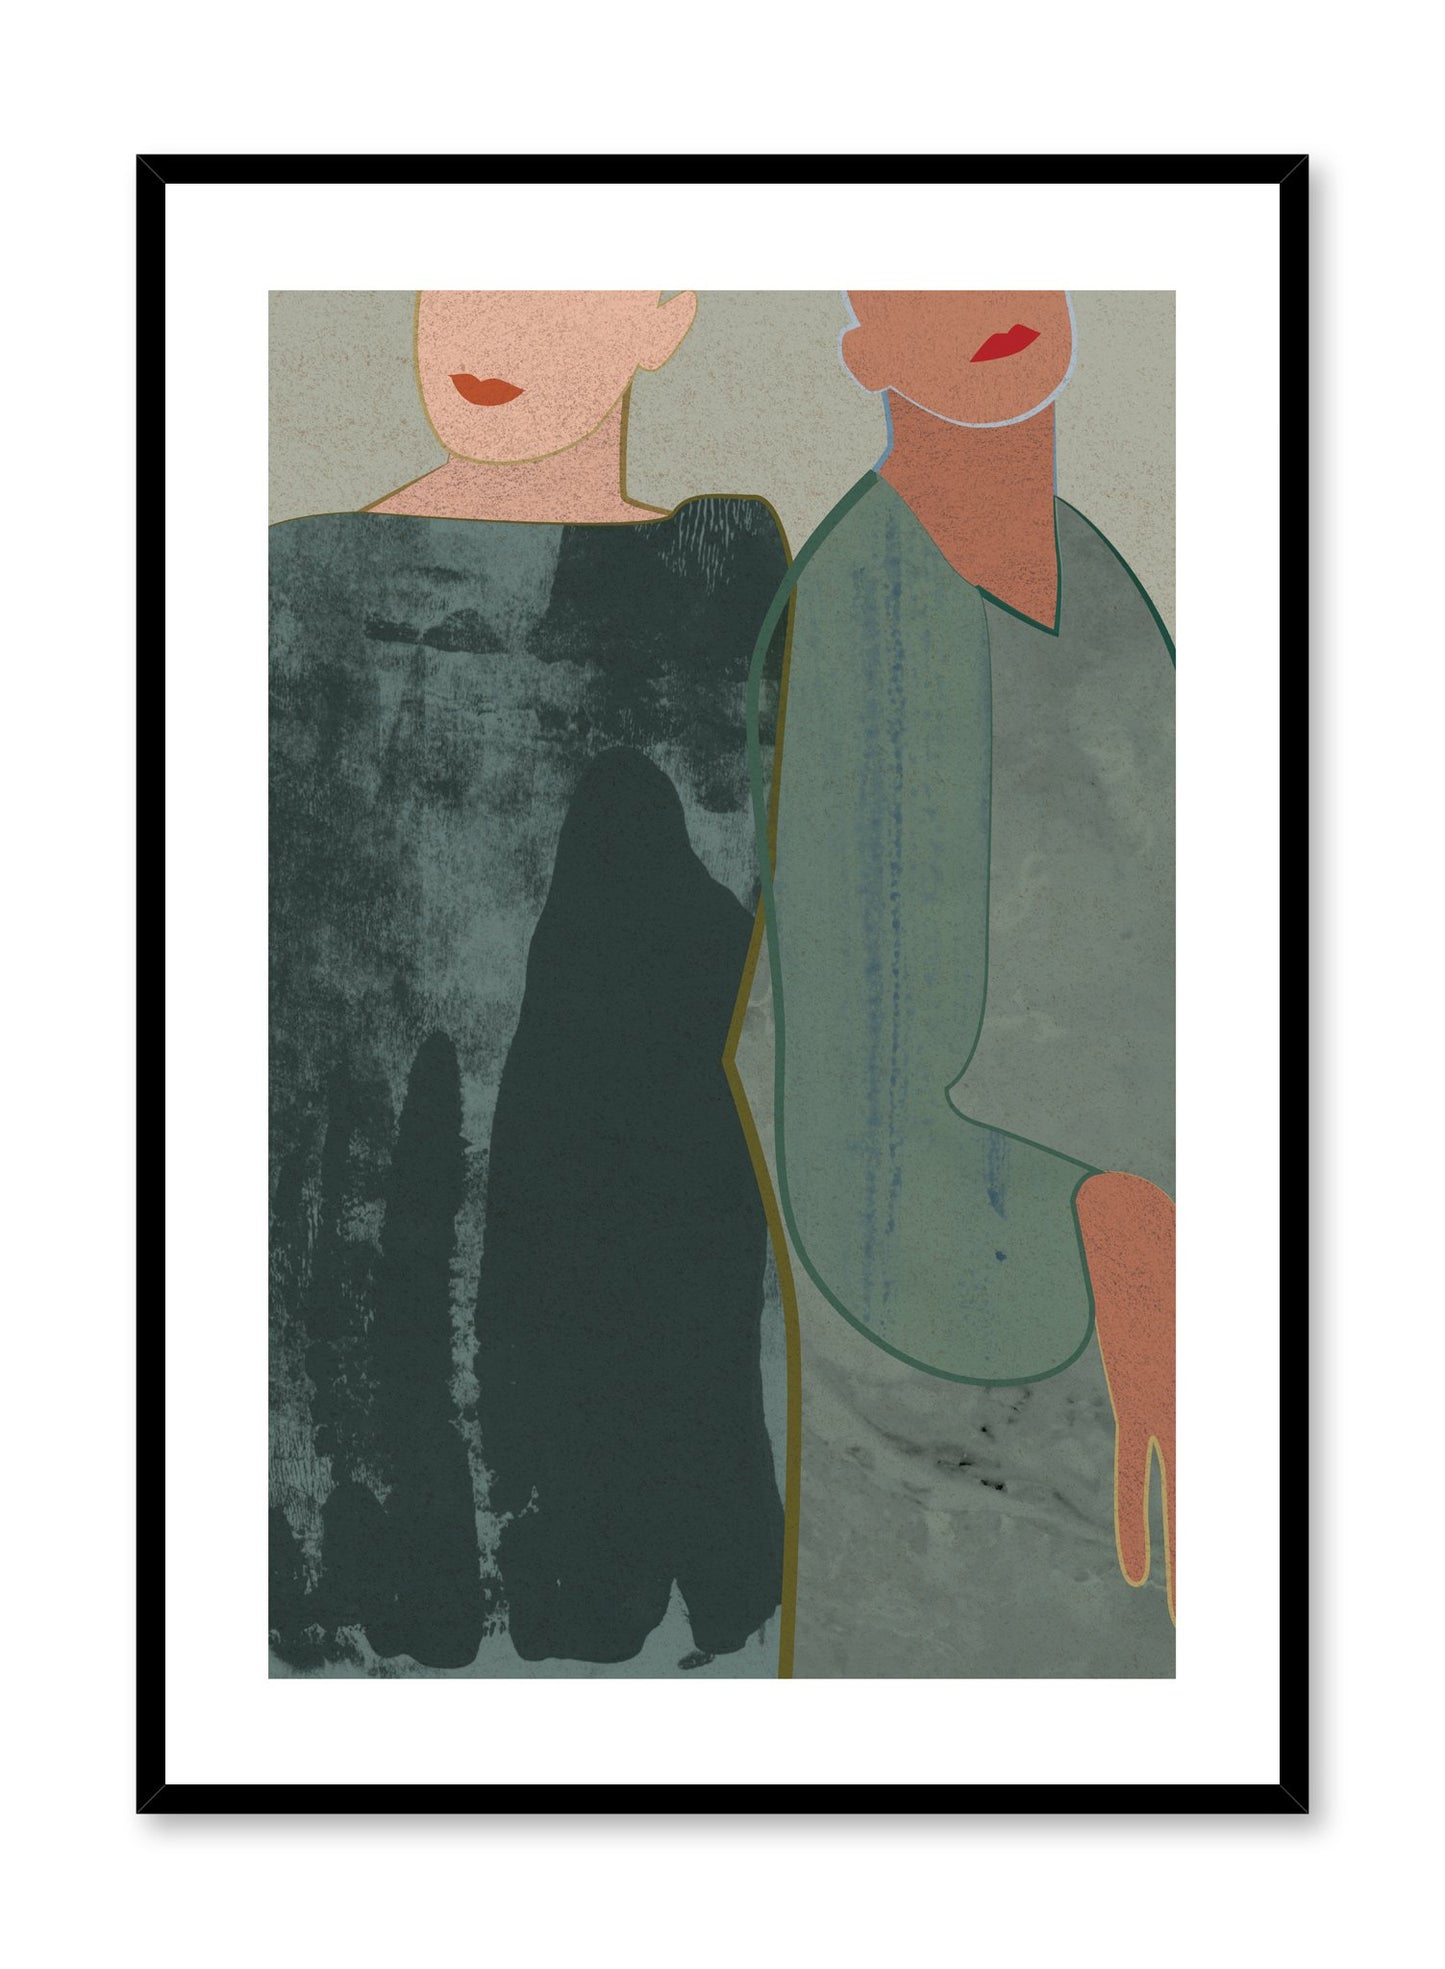 Fashion illustration poster by Opposite Wall with drawing of two woman Socialites